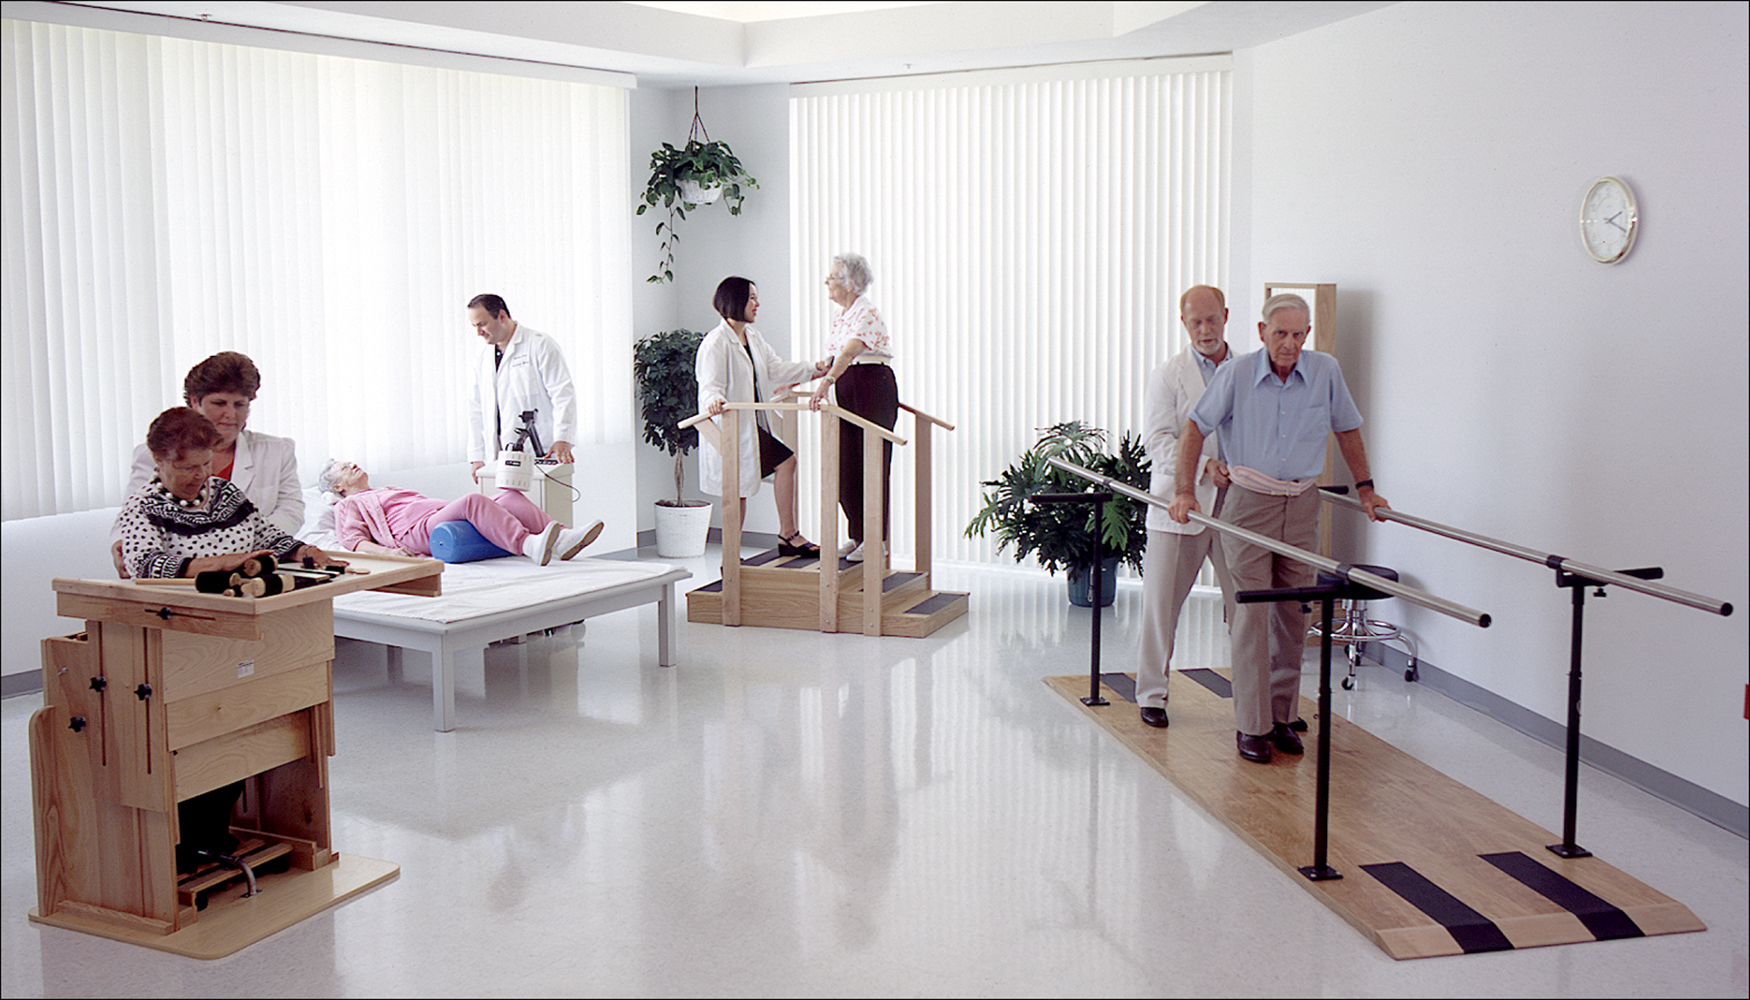 Physical Therapy room in nursing home